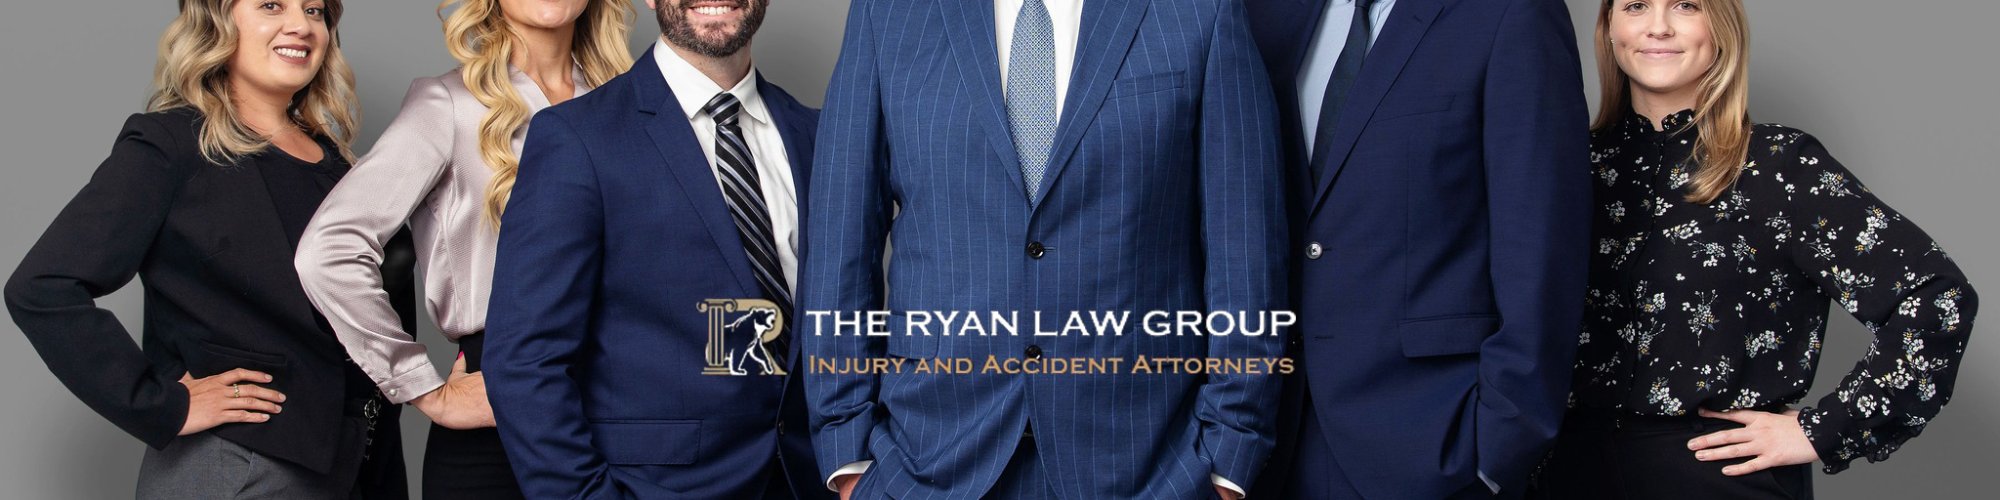 The Ryan Law Group Injury and Accident Attorneys